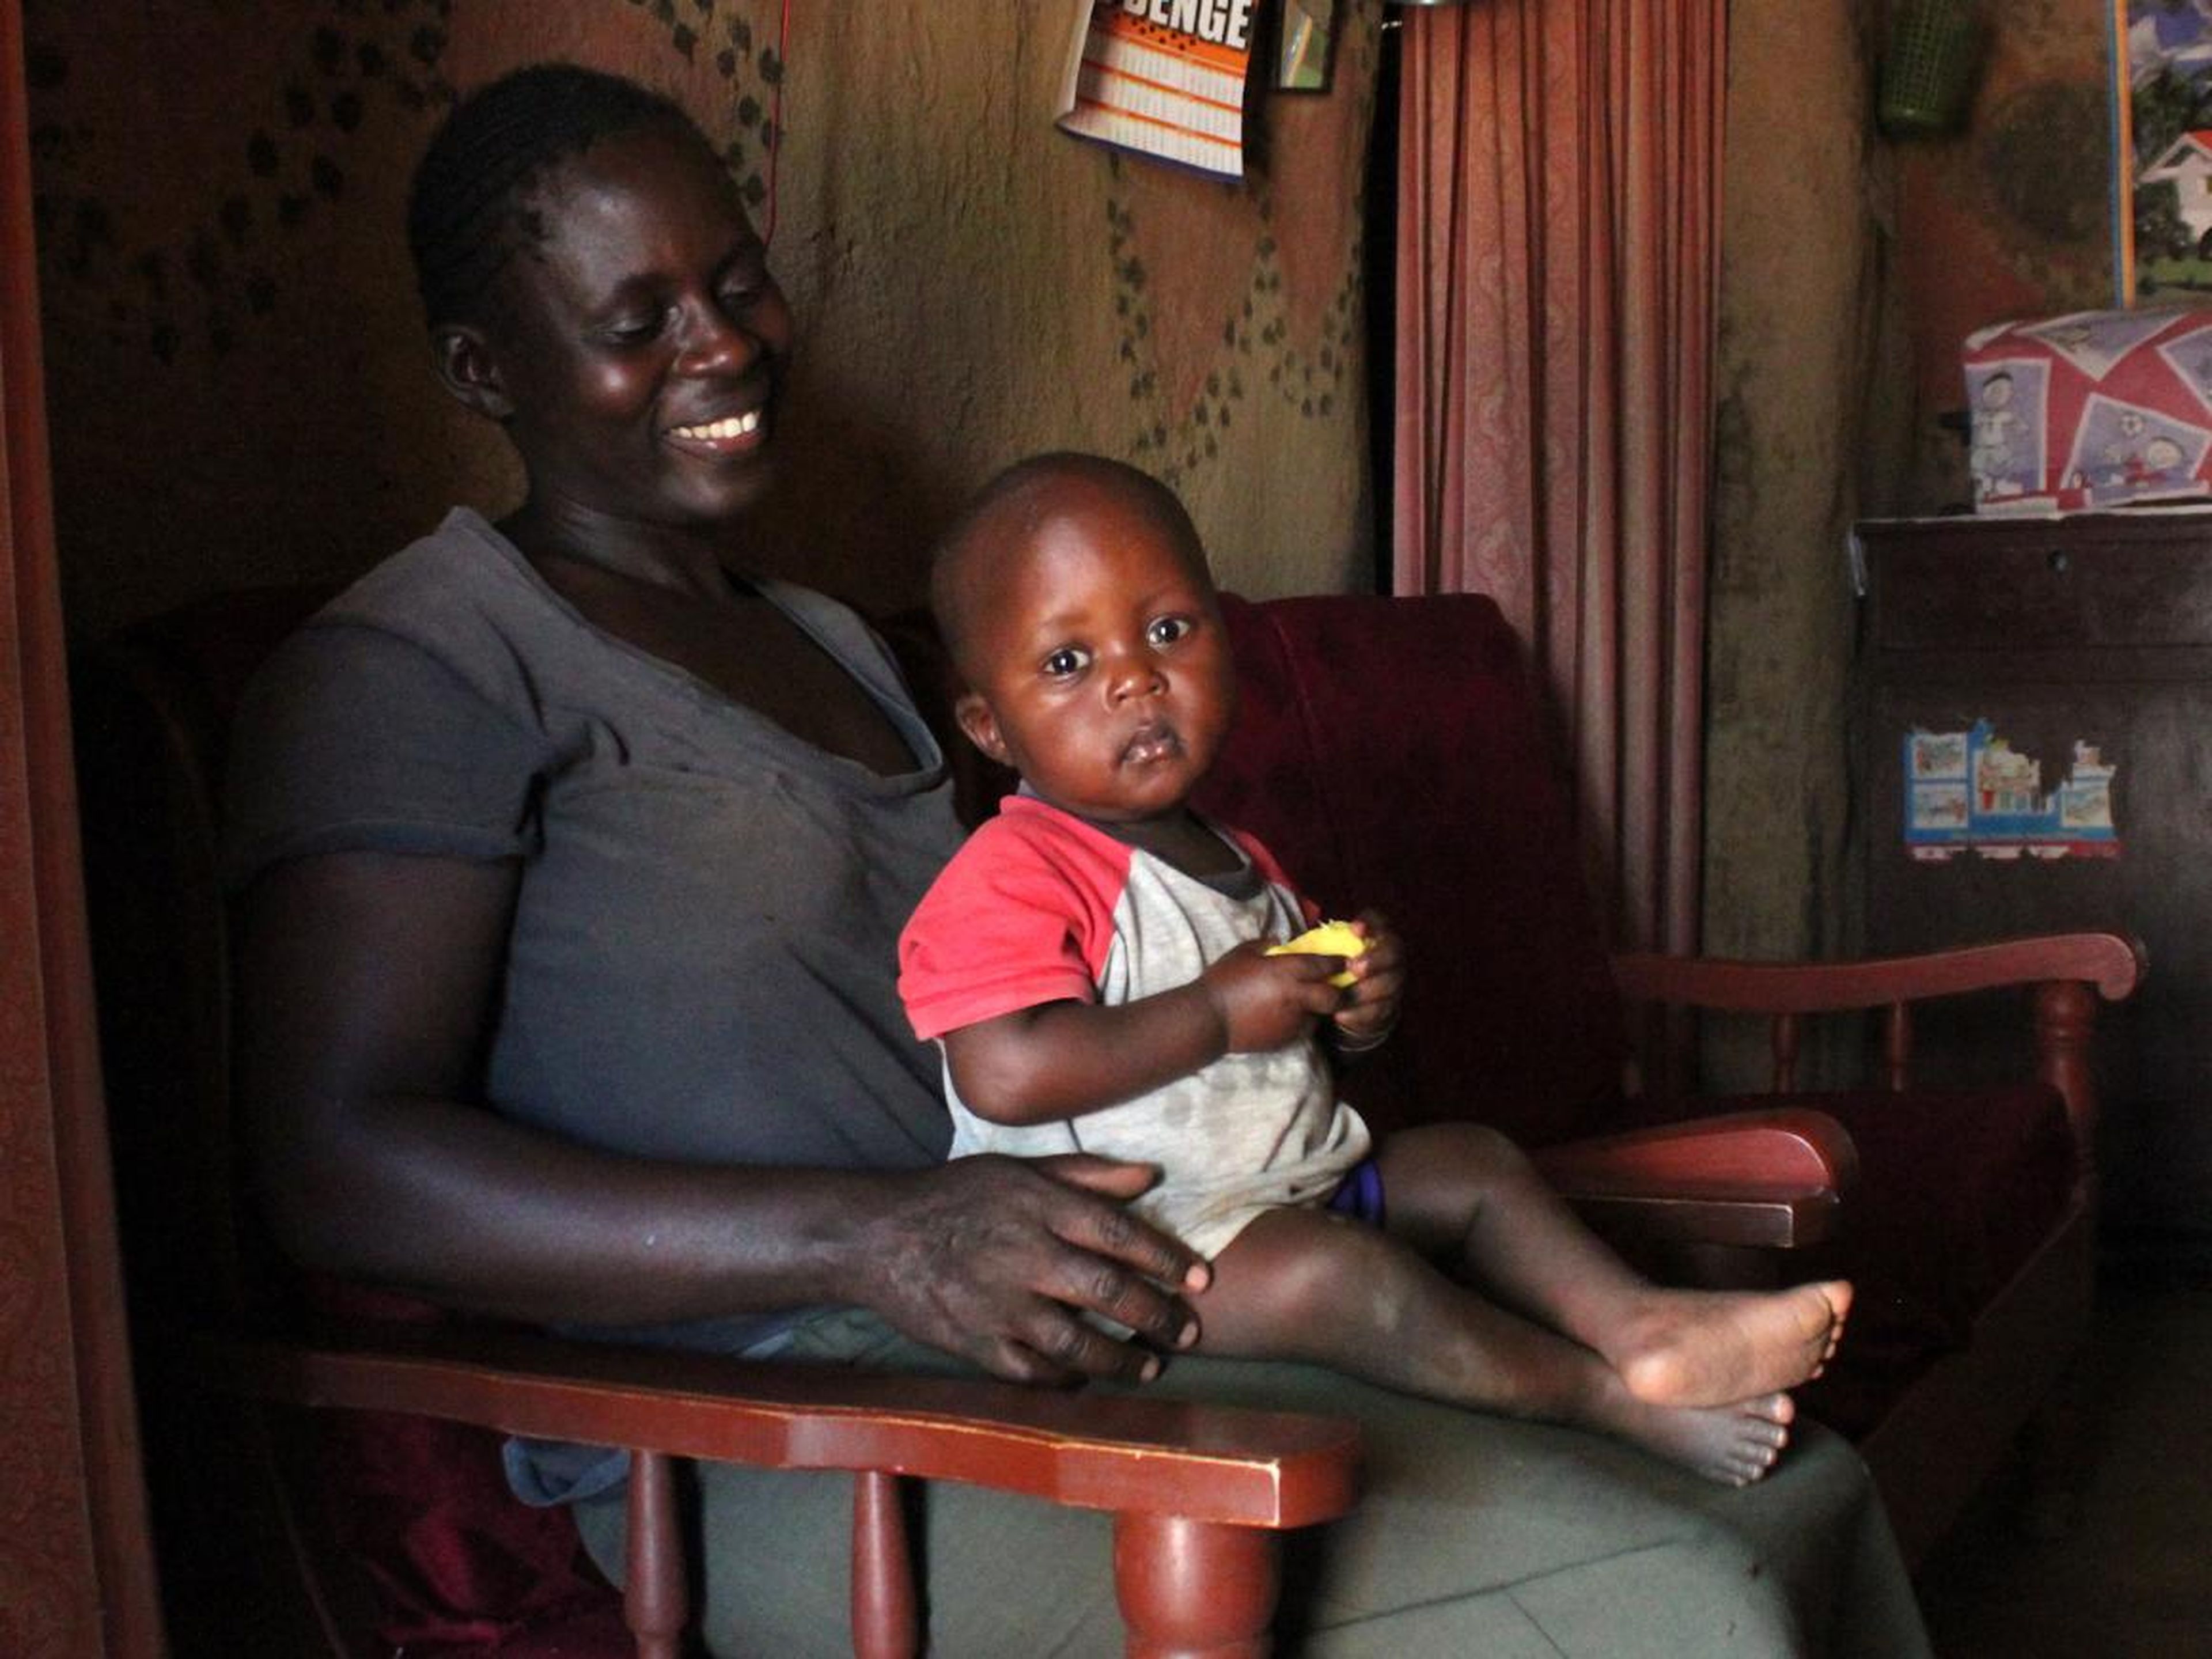 Monica Atieno Aswan is a basic-income recipient in Kenya, getting $22 a month to help support her family.